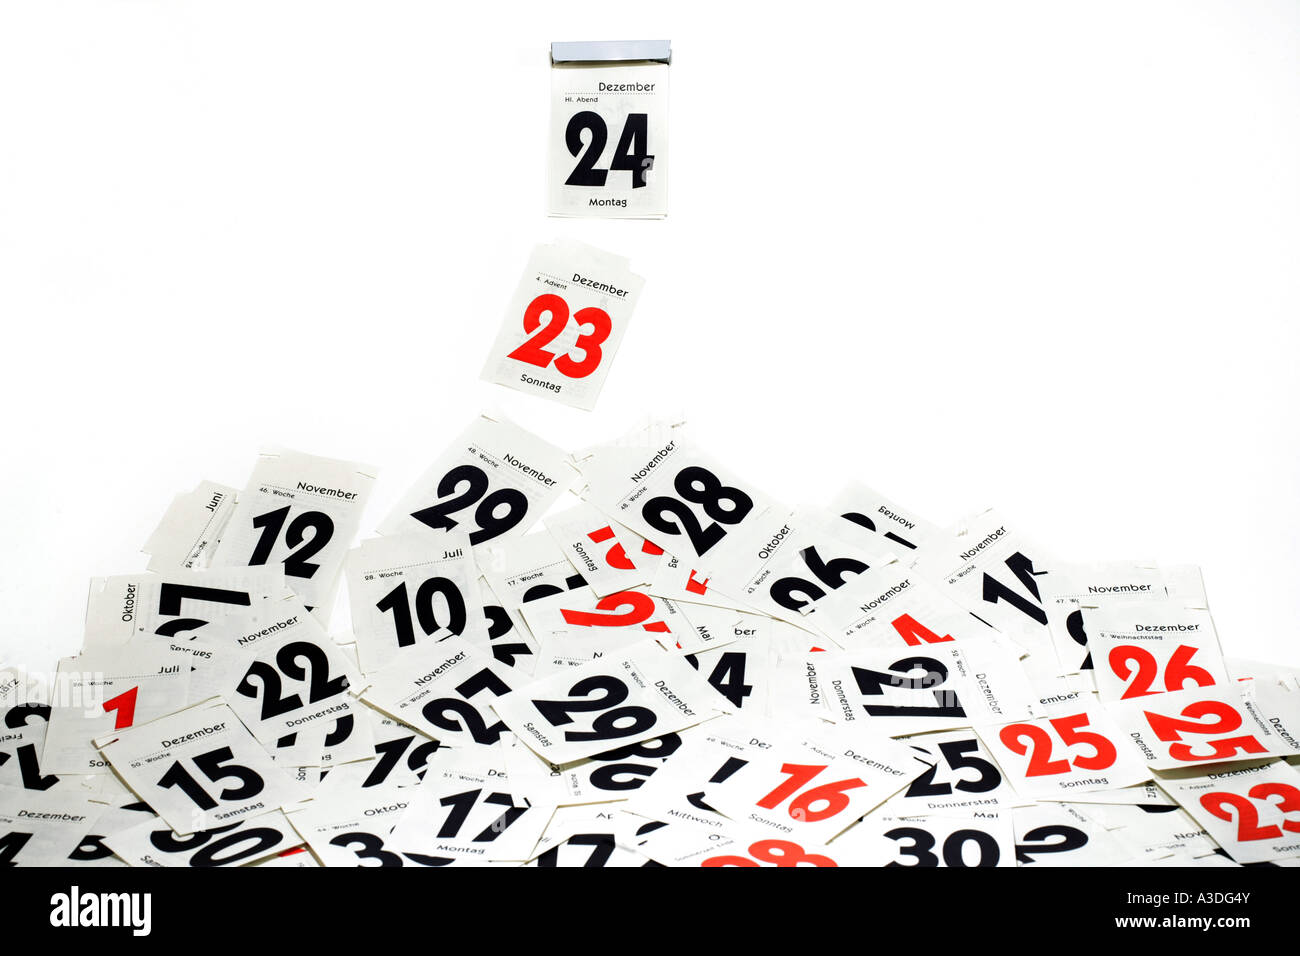 Its Christmas Eve - calendar shows end of 23th of December and the beginning of the 24th Stock Photo